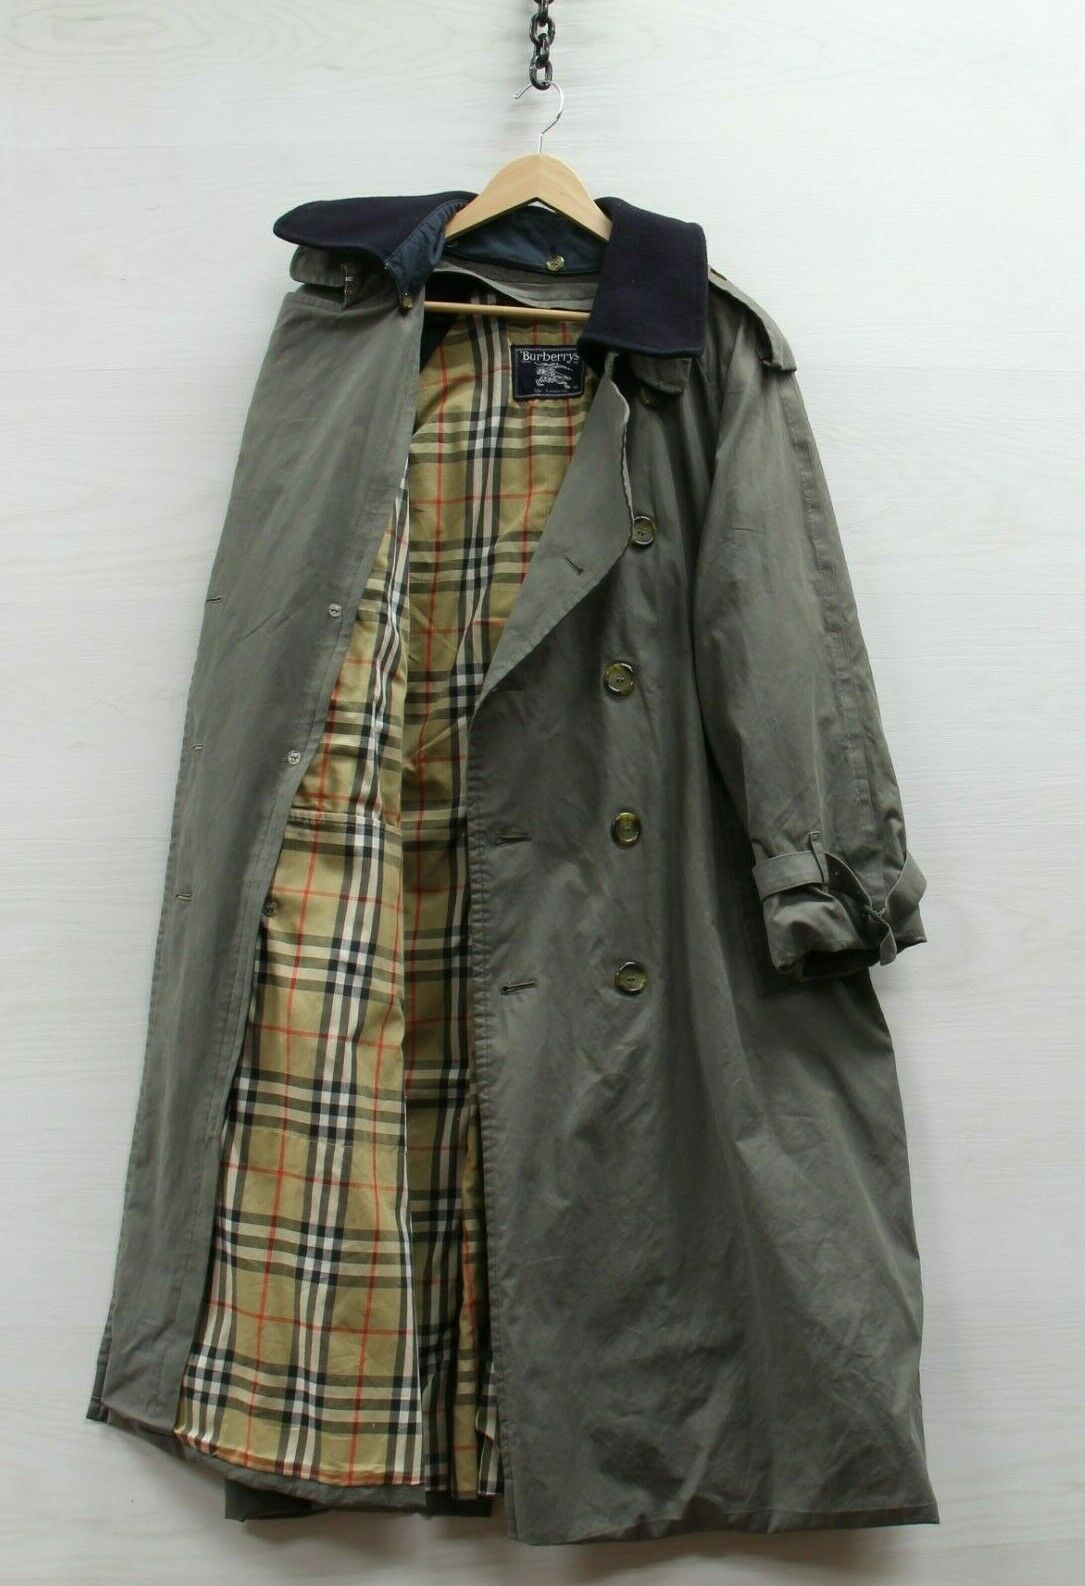 Vintage Burberrys Trench, Is this real?